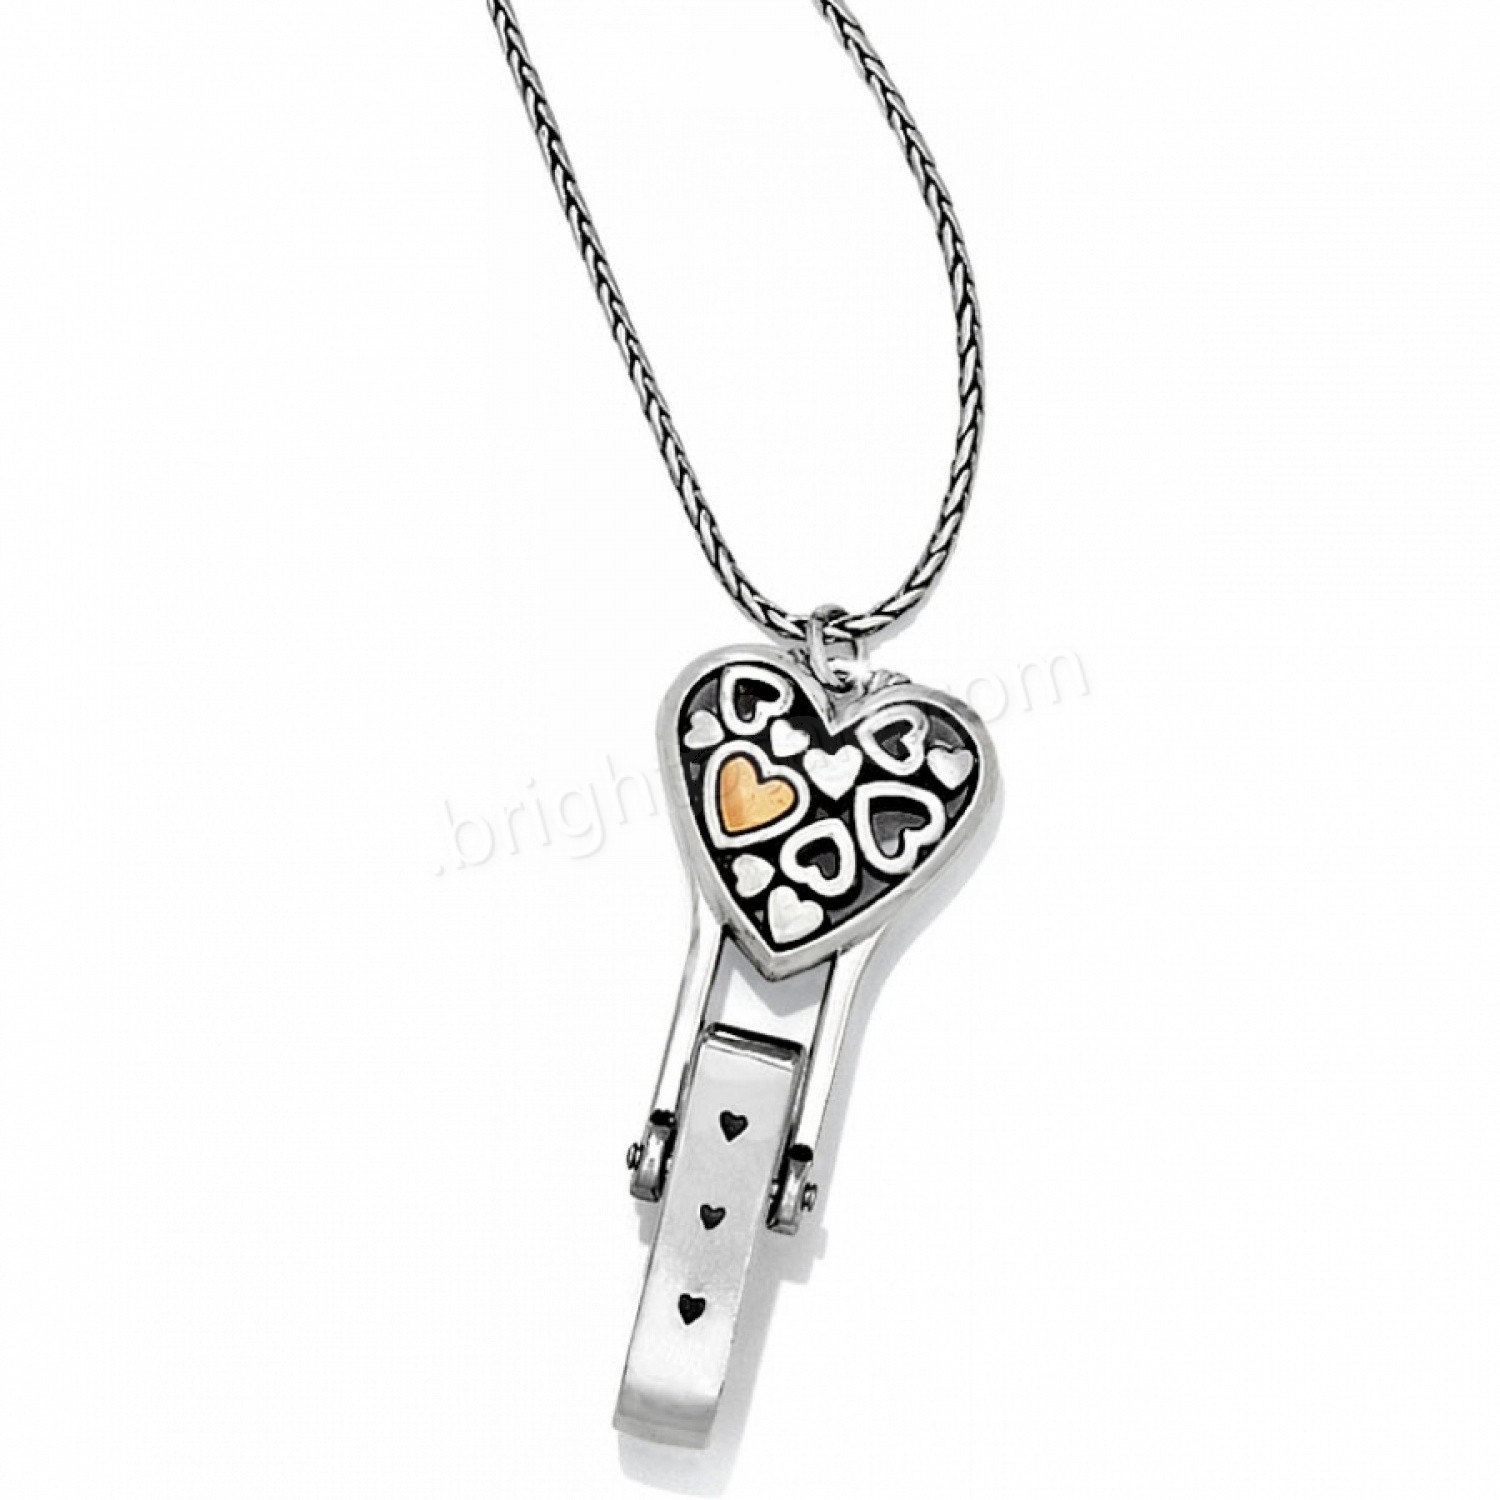 Brighton Collectibles & Online Discount Floating Heart Badge Clip Necklace - Brighton Collectibles & Online Discount Floating Heart Badge Clip Necklace